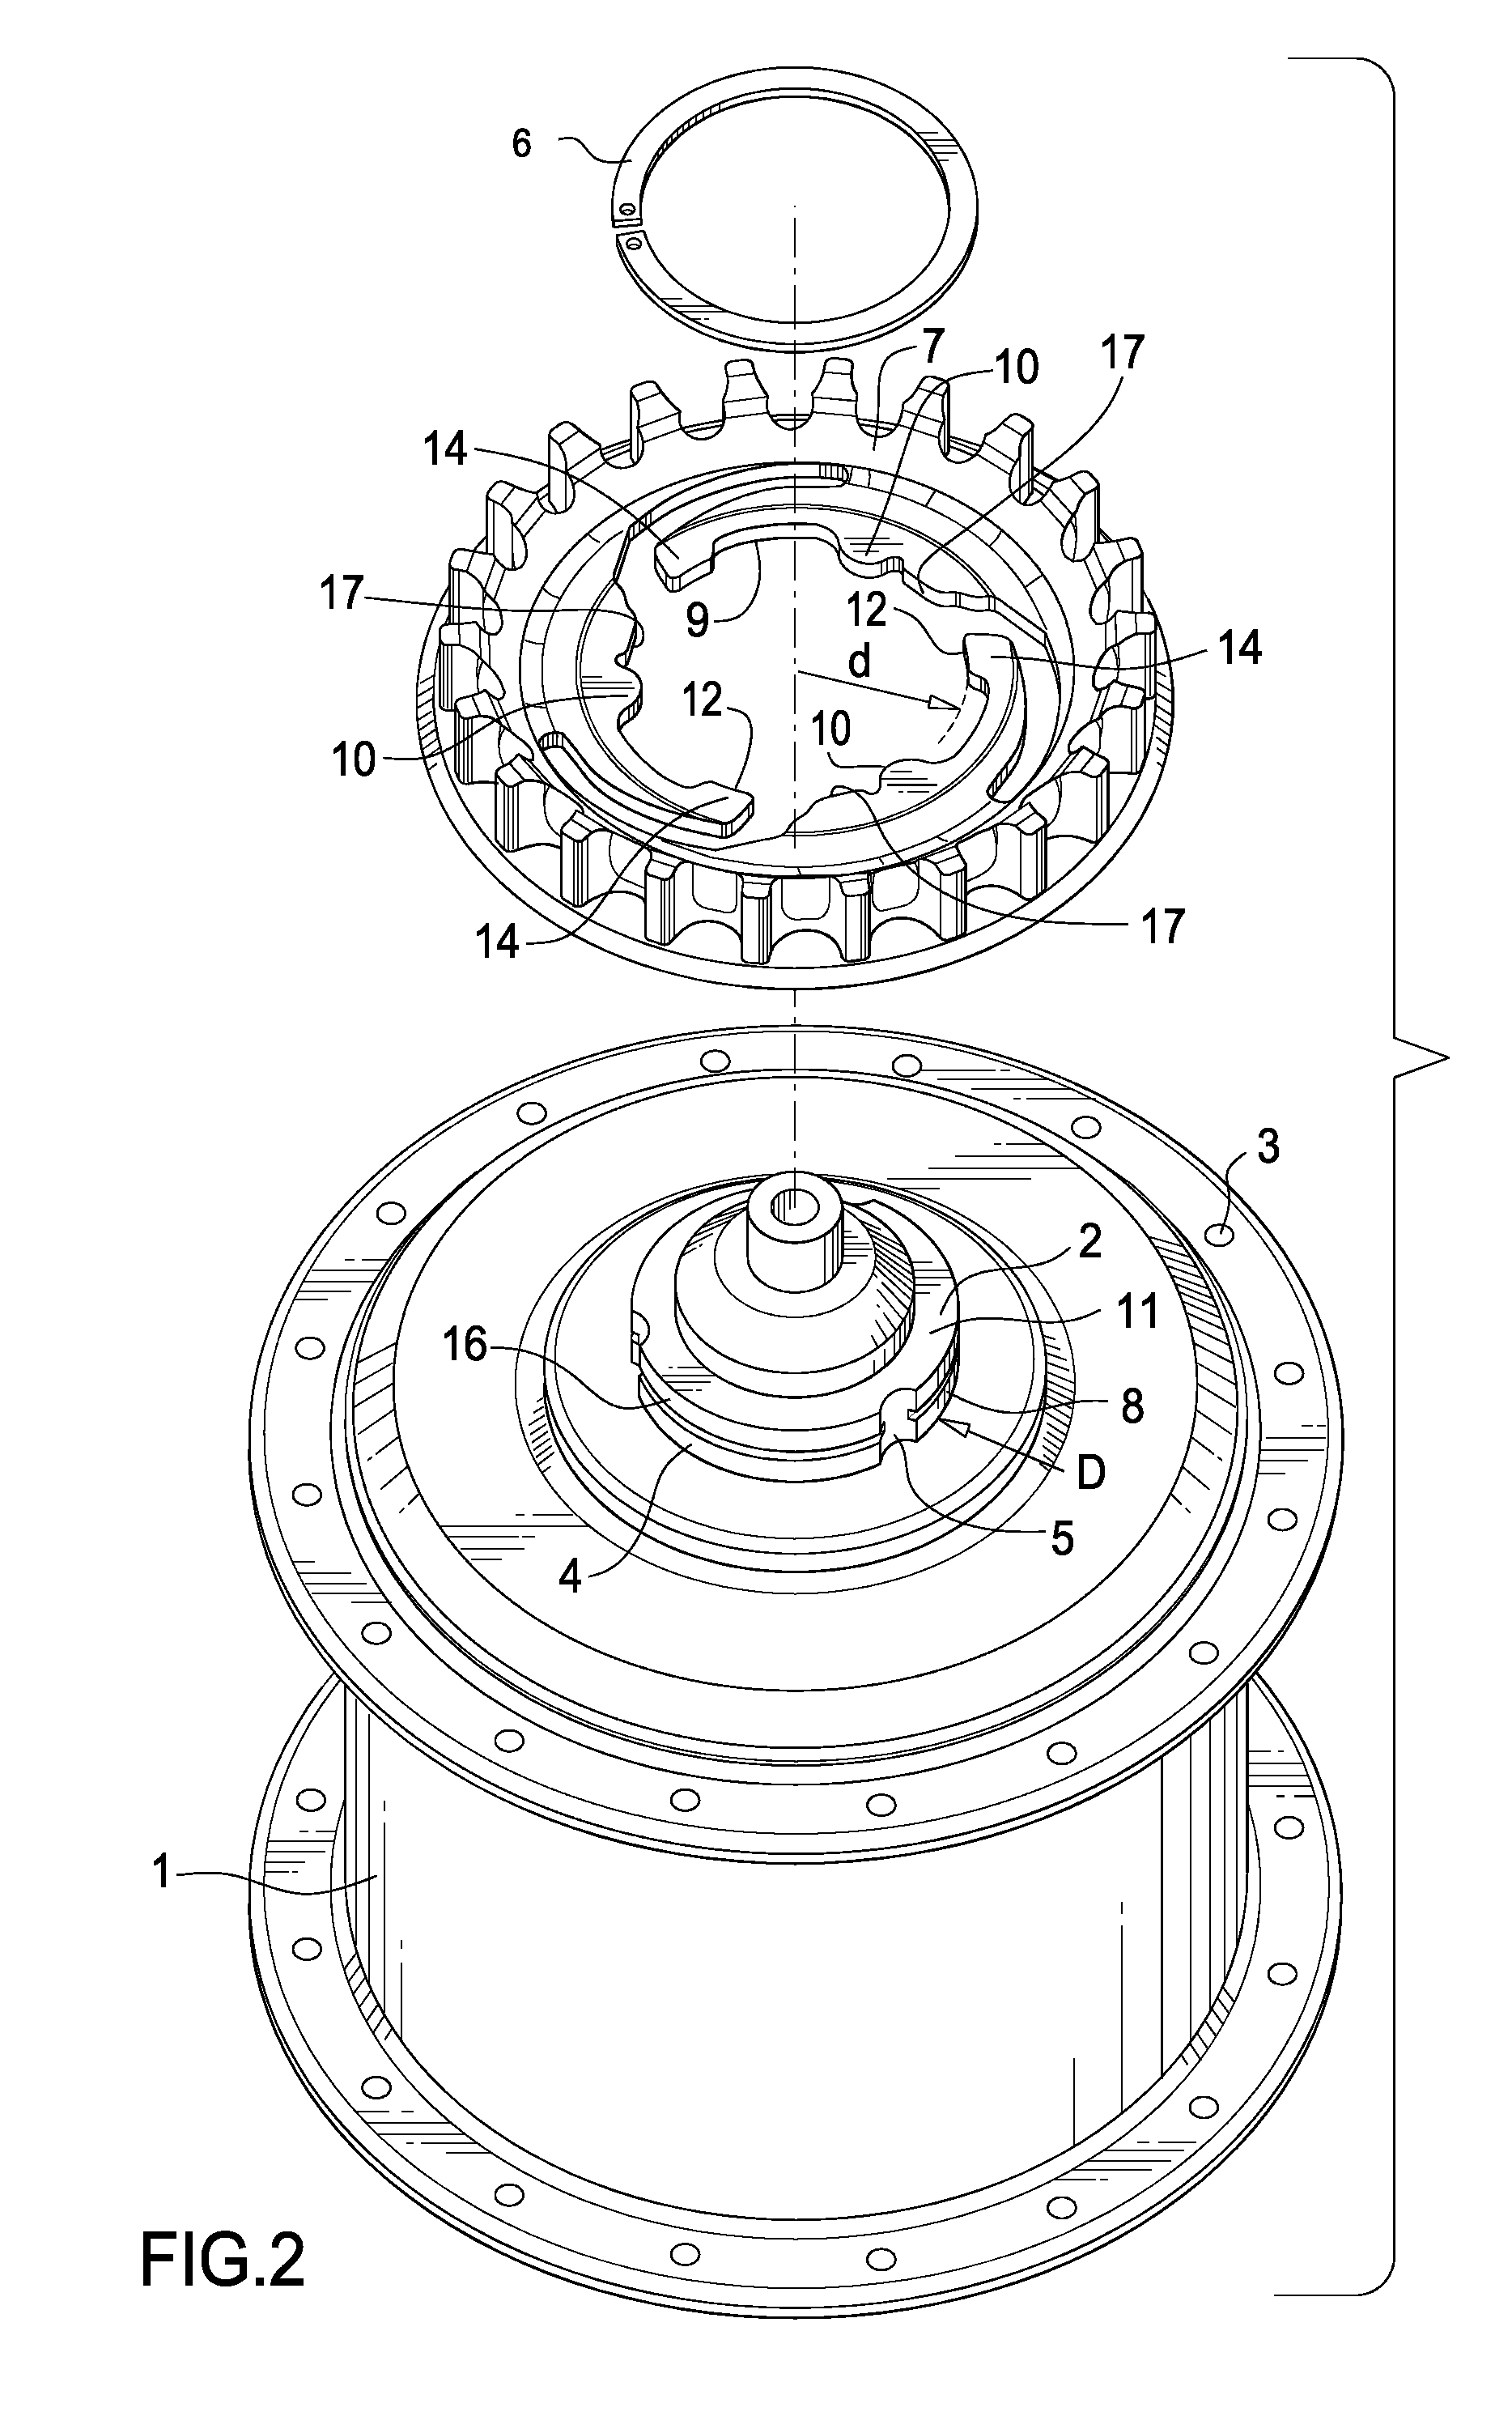 Toothed sprocket with elastic centering element